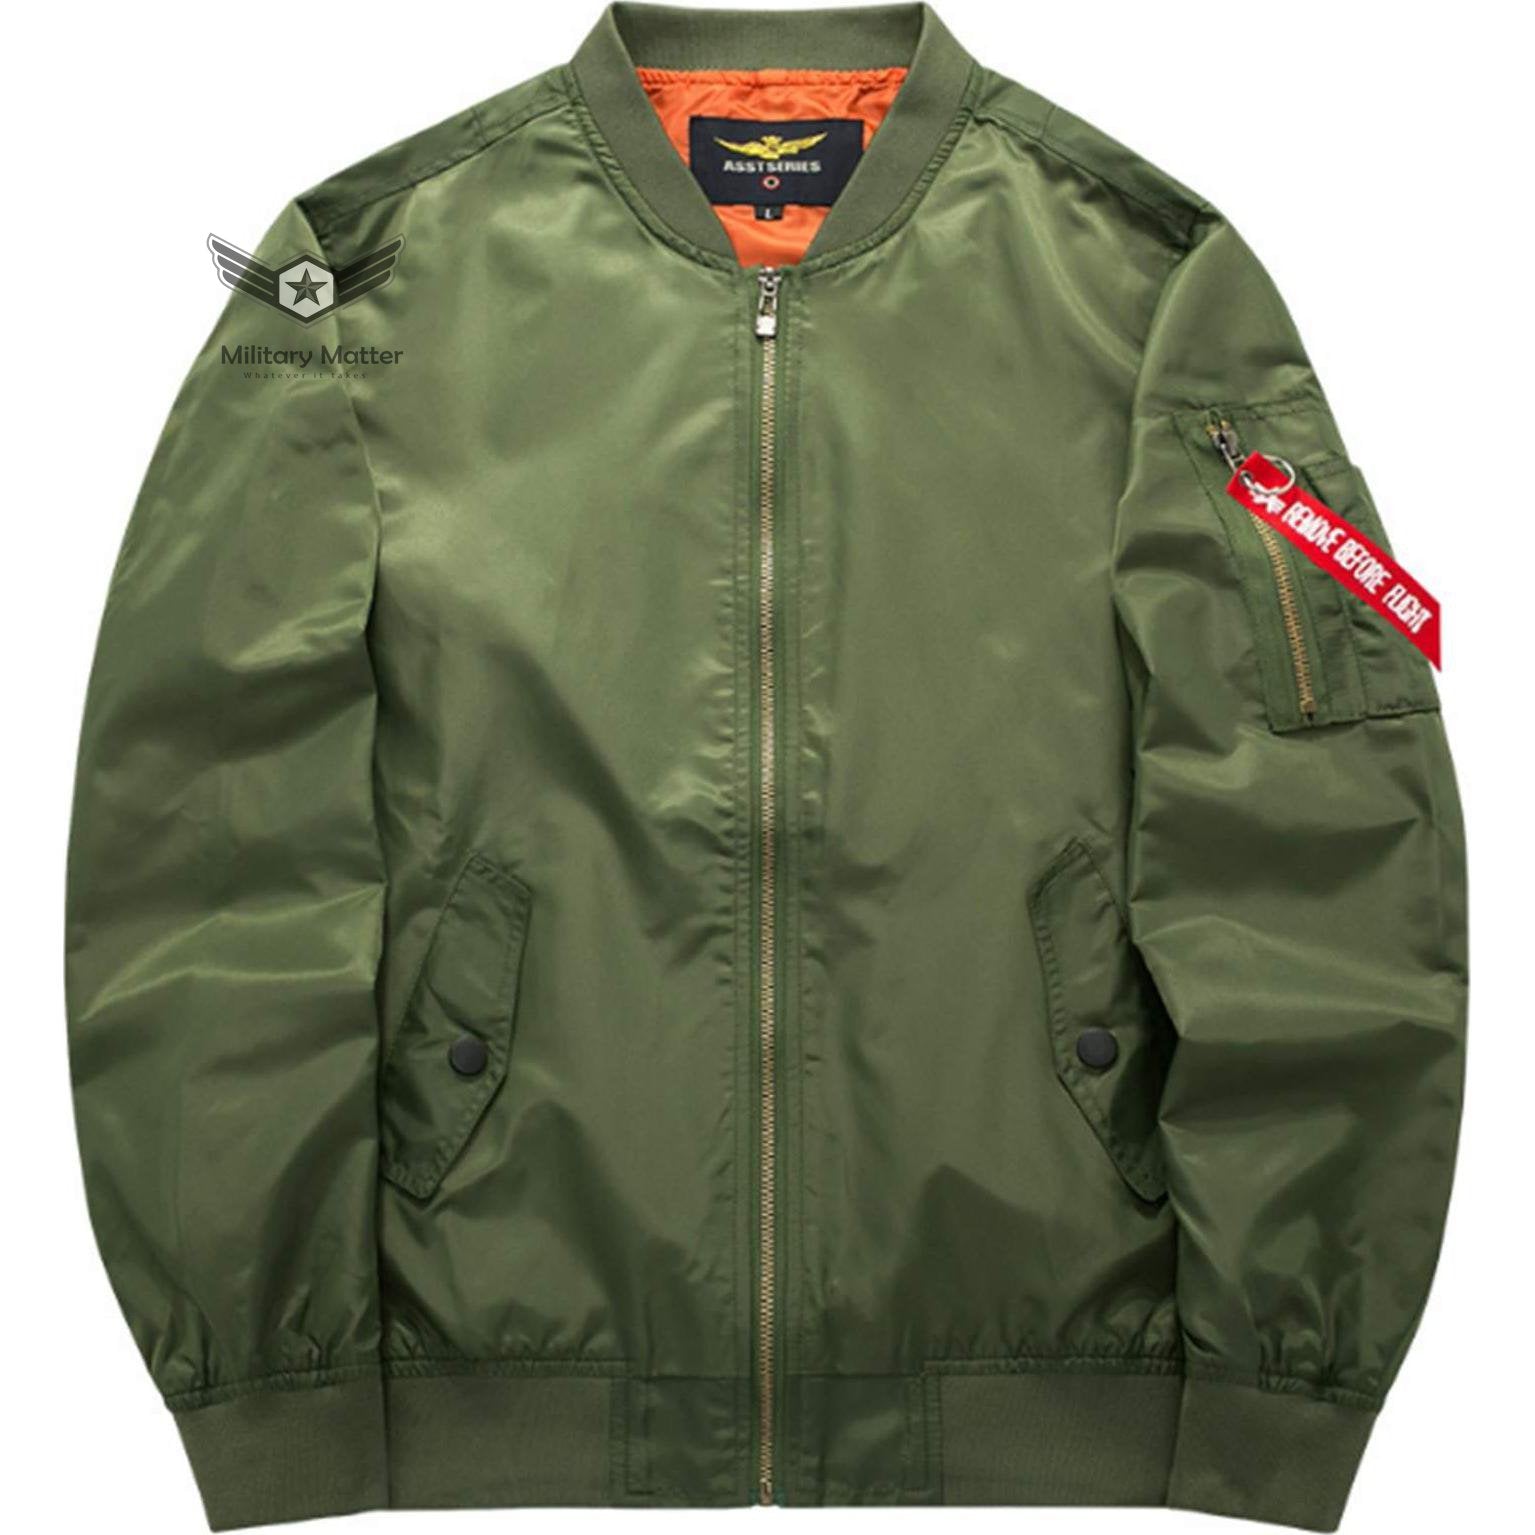  Military Matter Military Matter Air Division Flight Pilot Bomber Jacket | The Best CS Tactical Clothing Store